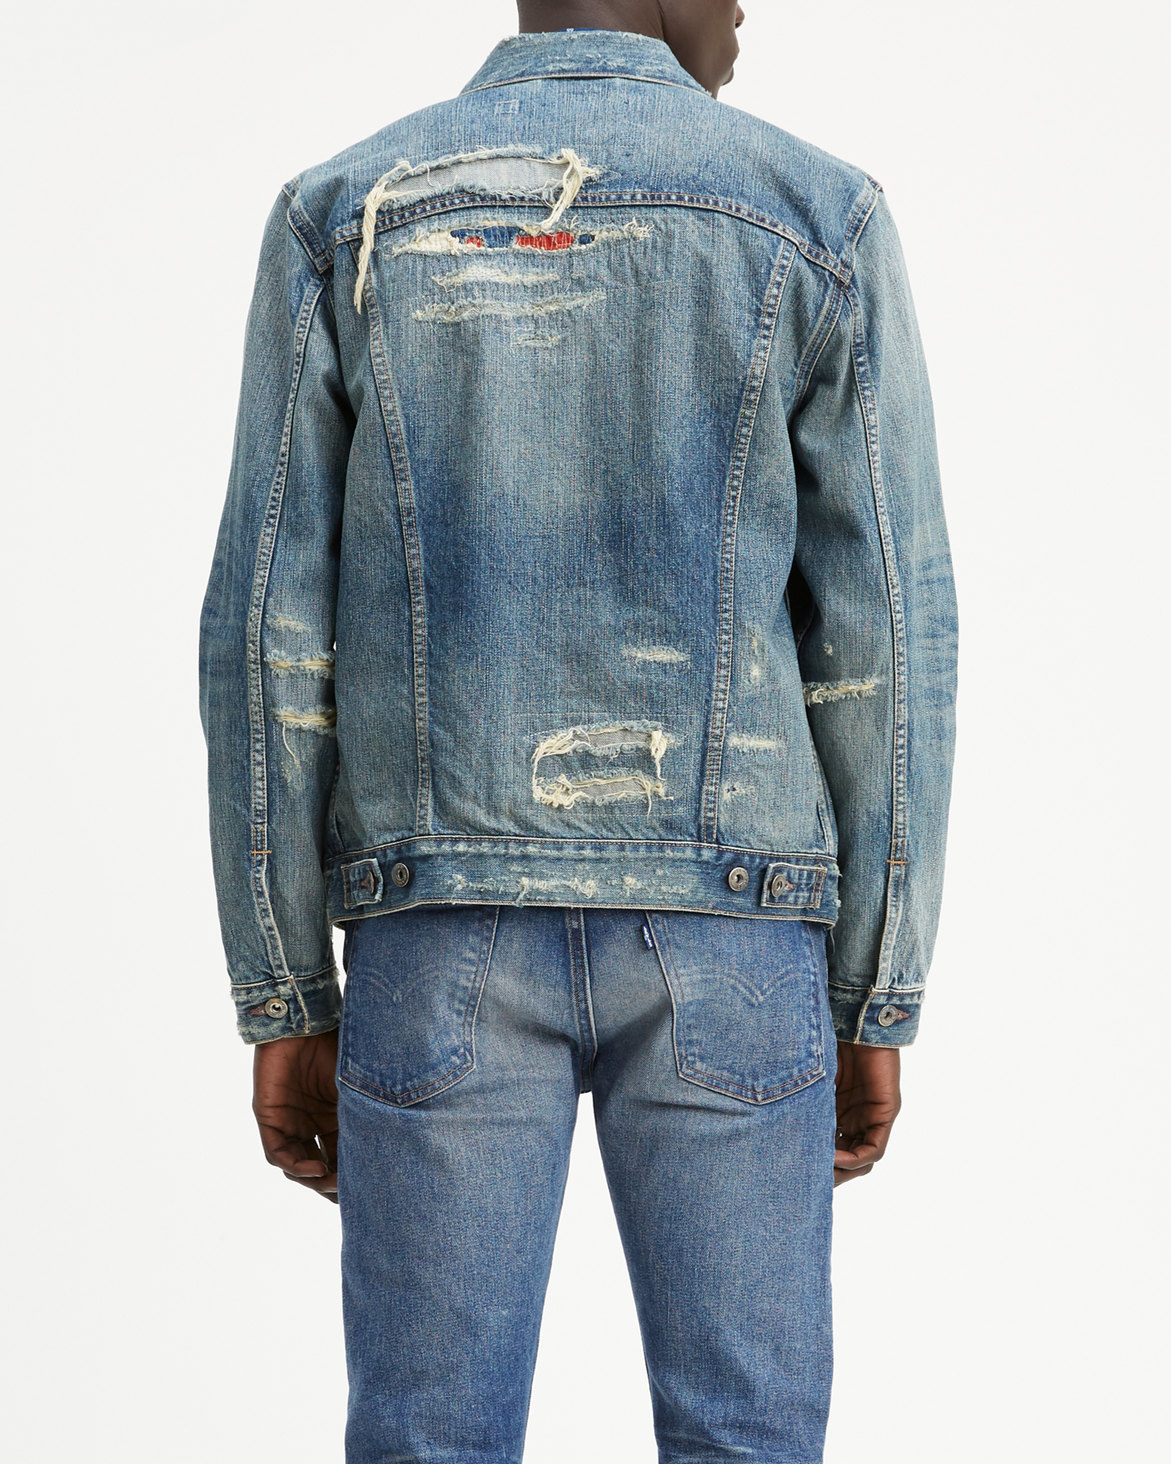 Levi's Made & Crafted Type III Trucker Jacket | Levi